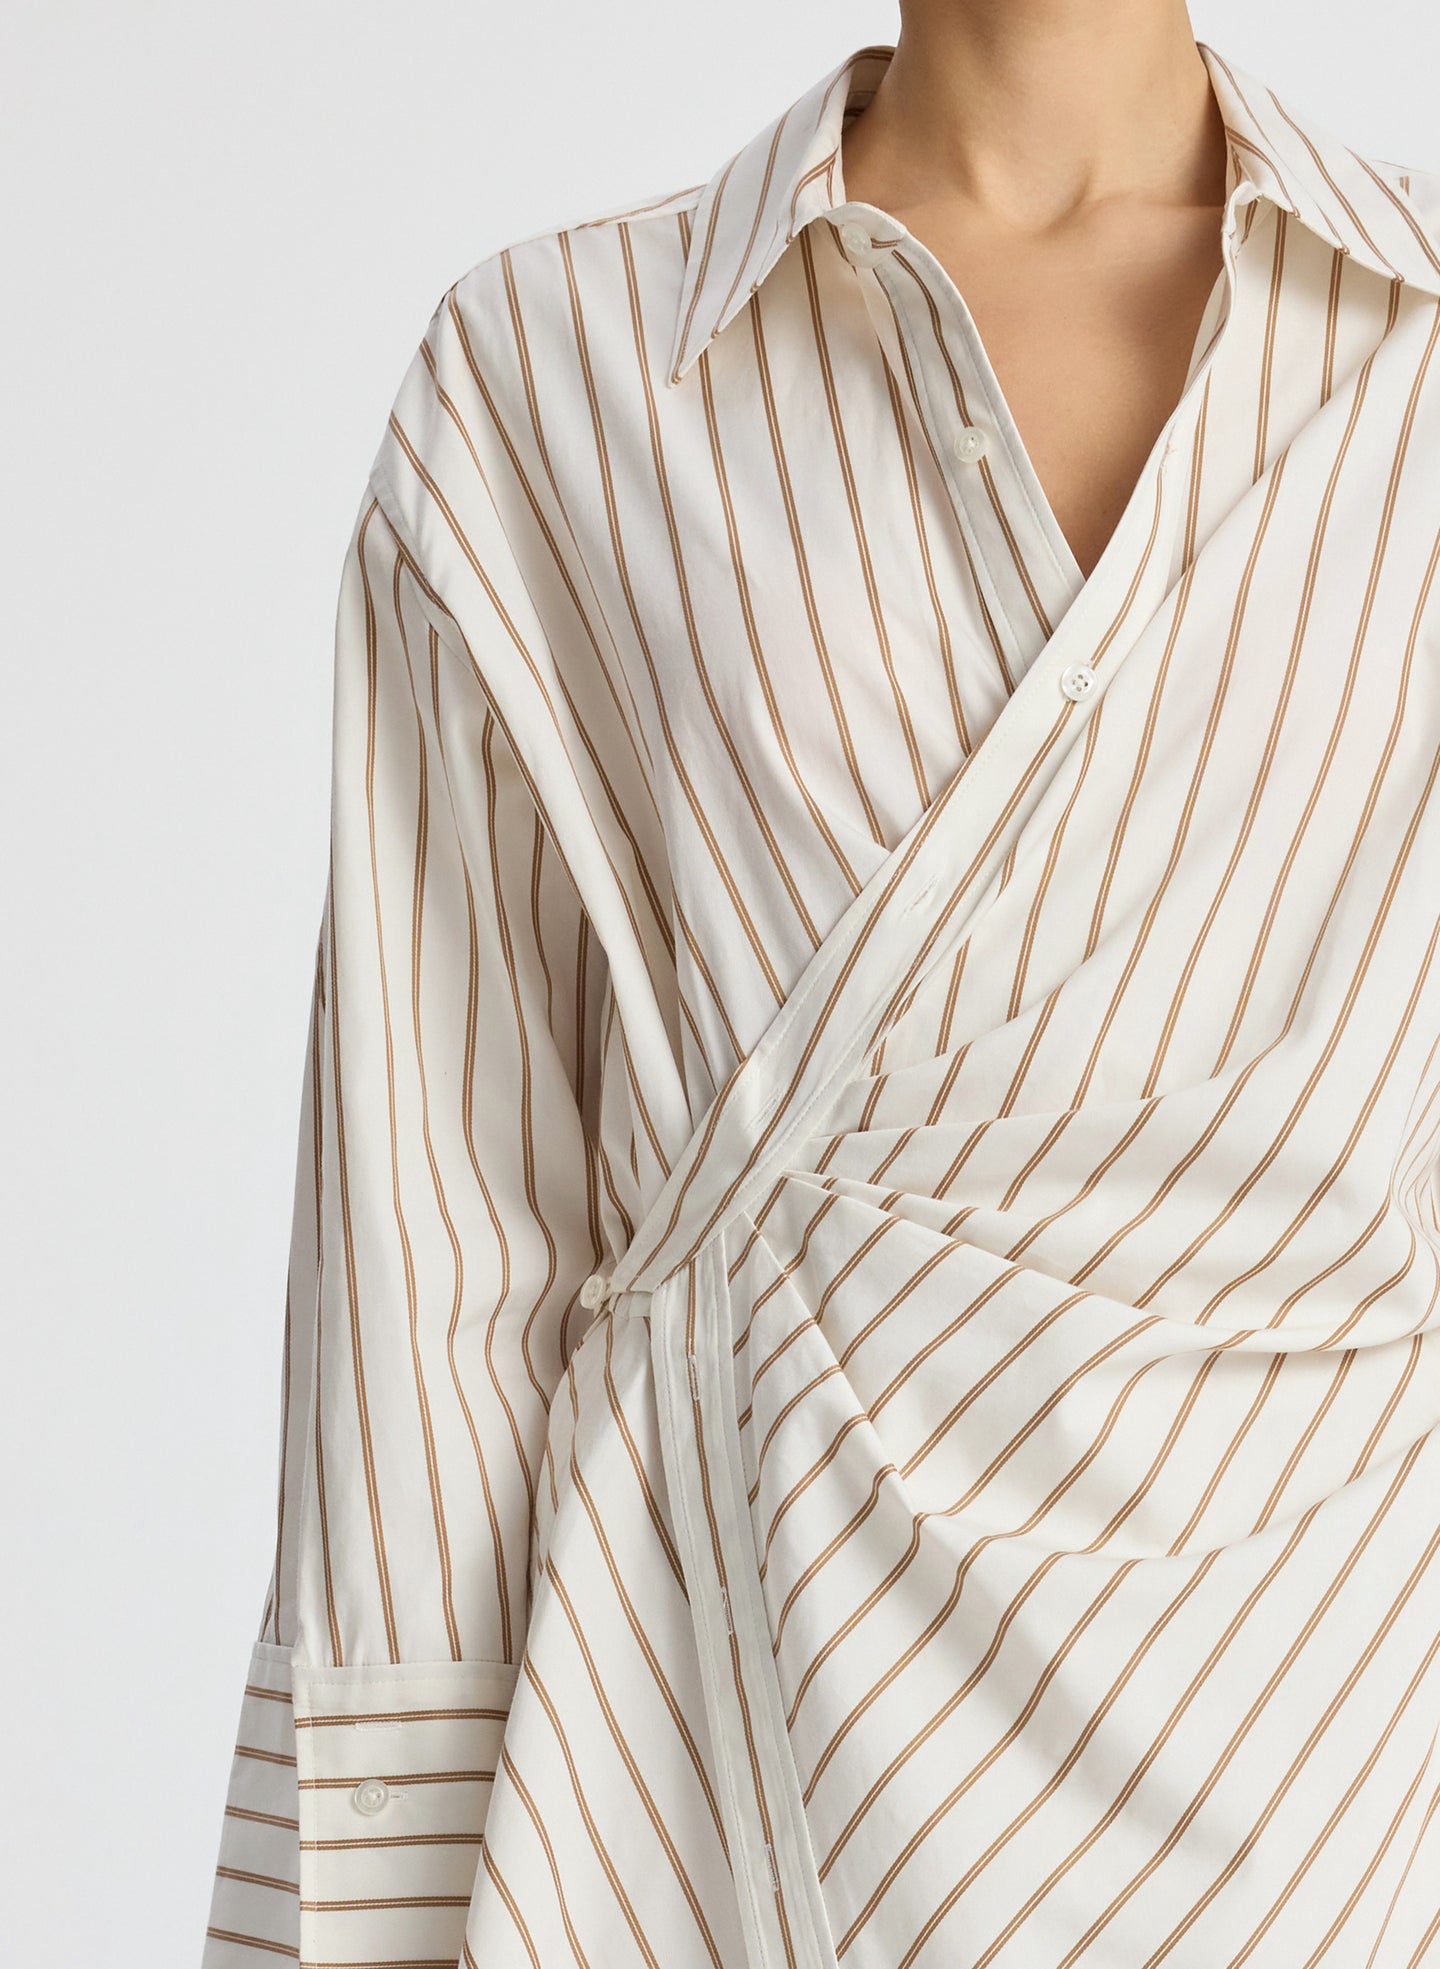 detail view of woman wearing cream and brown striped wrapped shirtdress